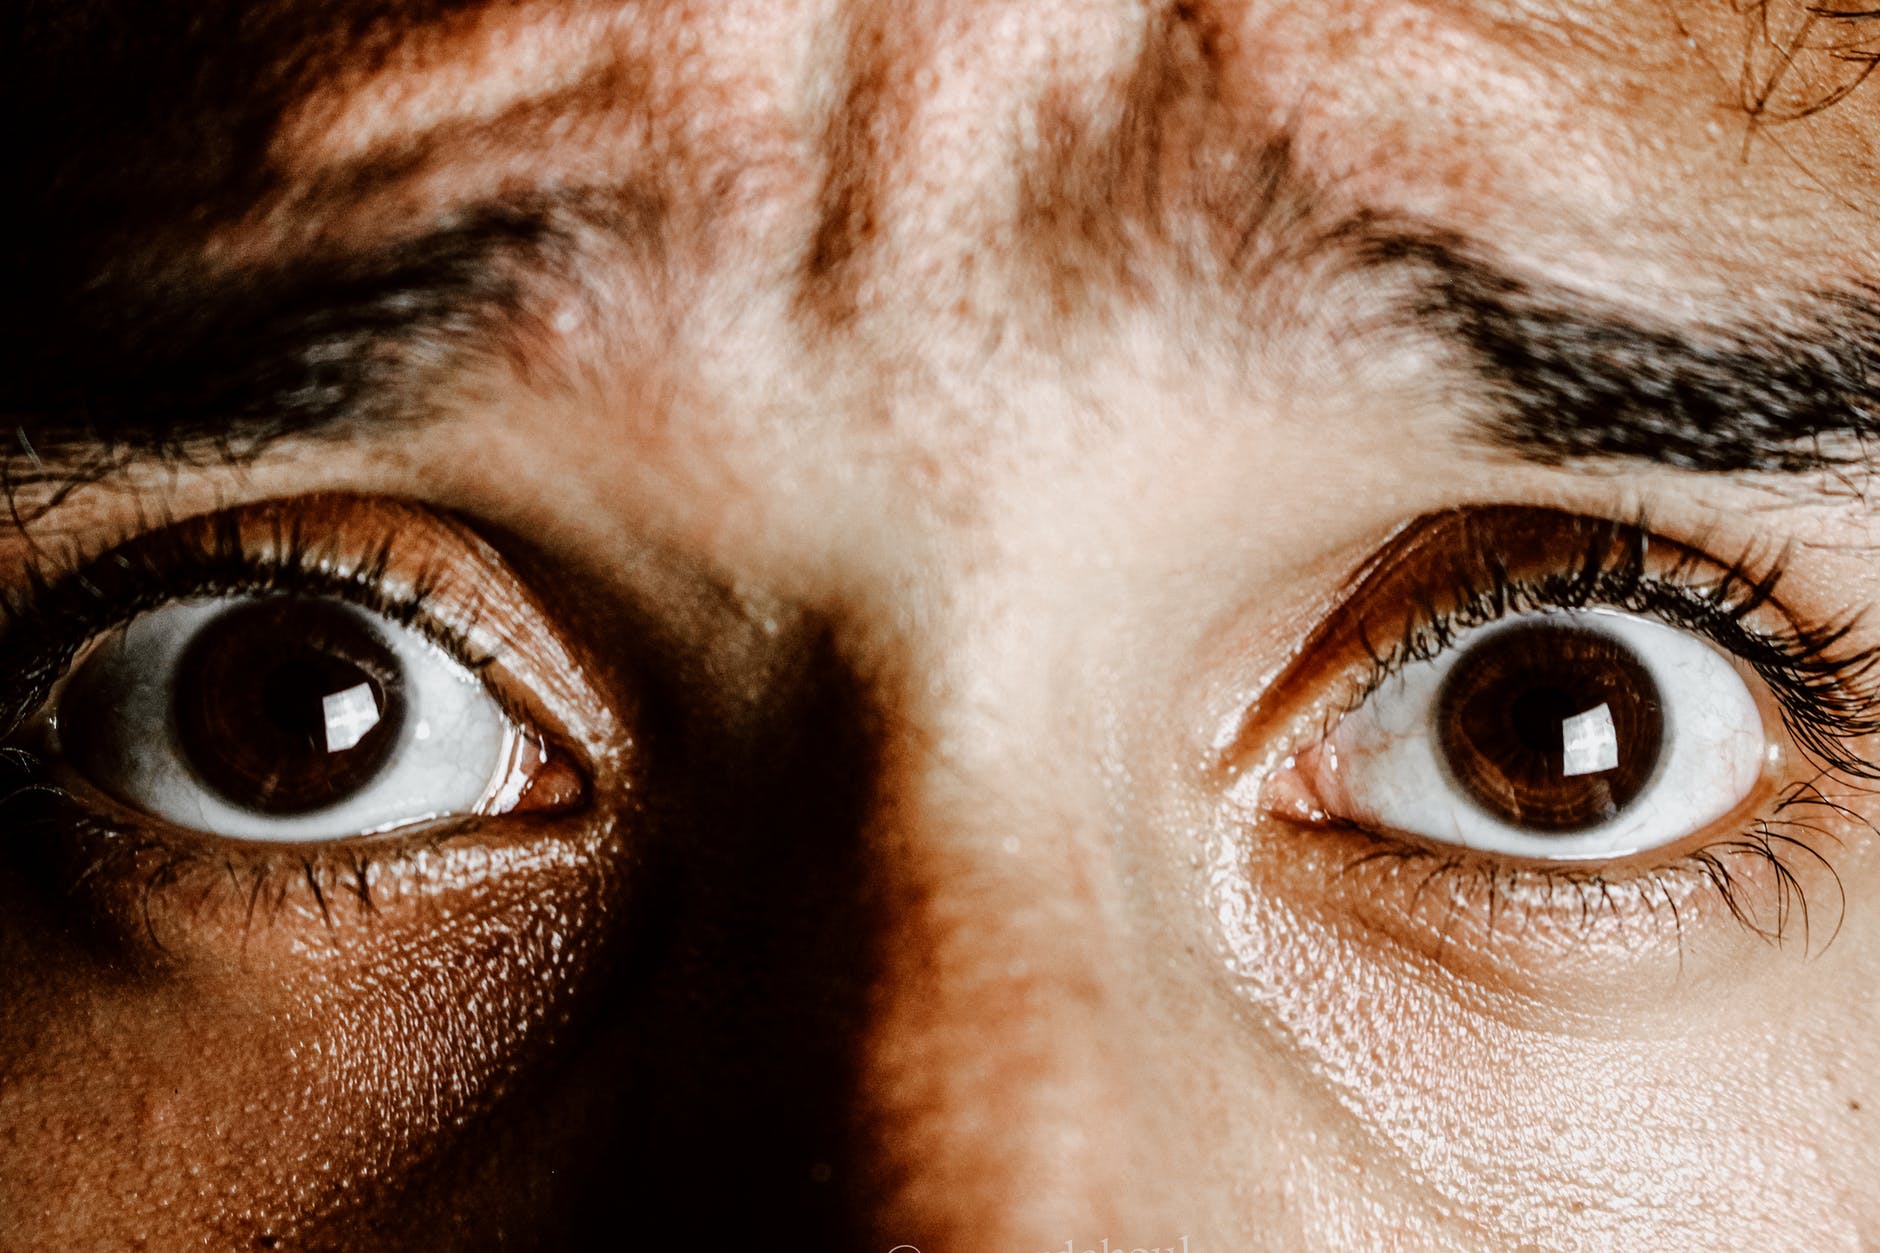 brown eyes of scared young person | Do You Have This Hole Phobia?